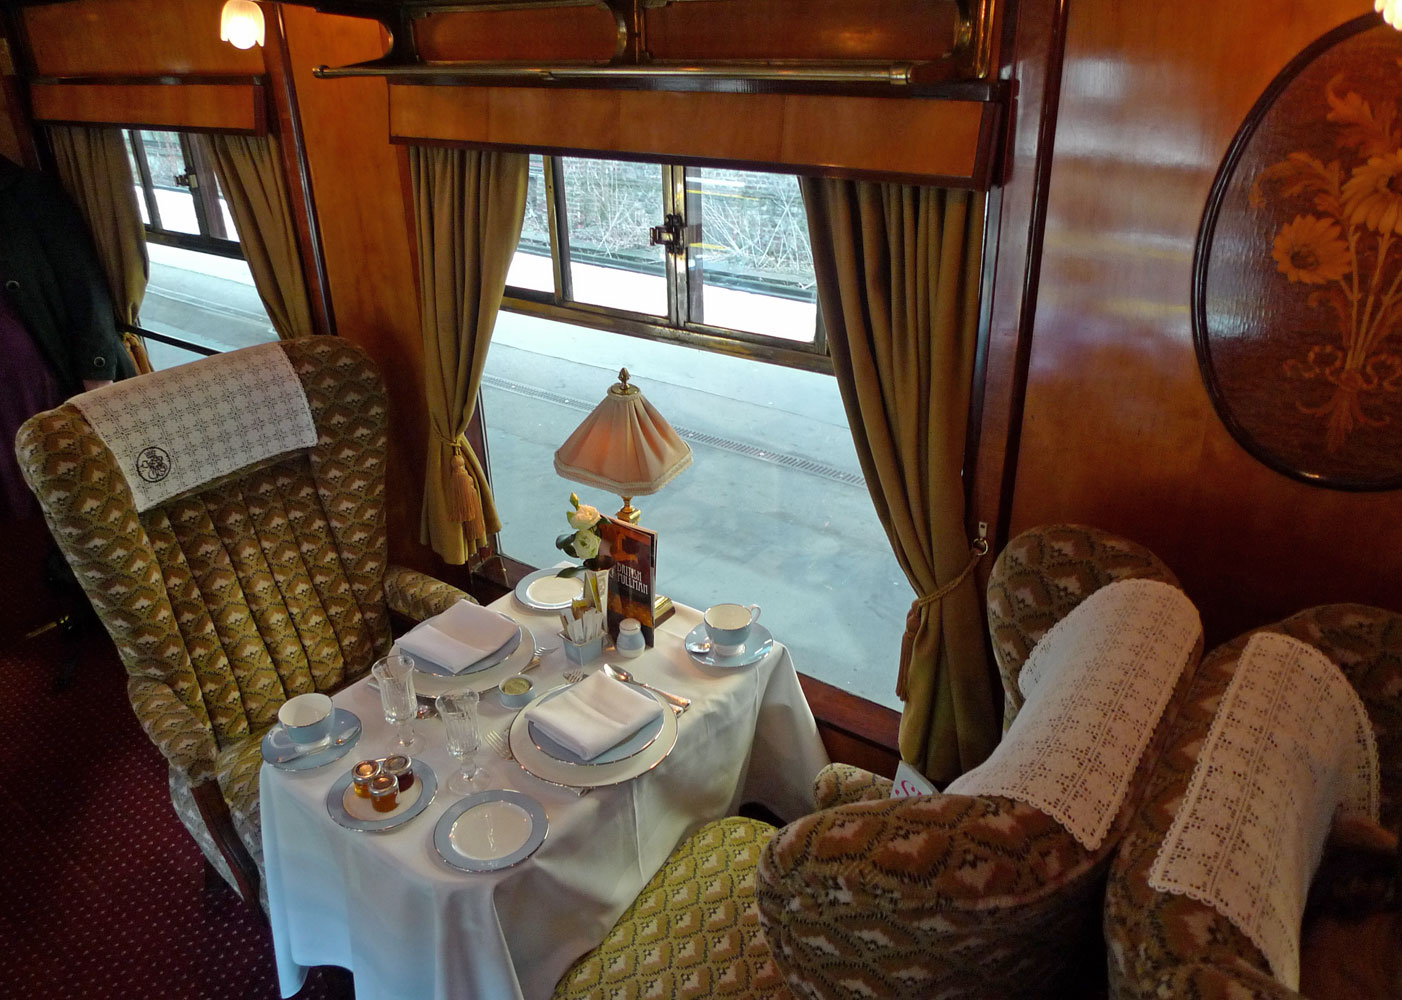 Venice Simplon Orient Express 2020 Prices and Timetables now available –  Venice Simplon Orient Express from London to Venice or Venice to London –  Signature journey 2020